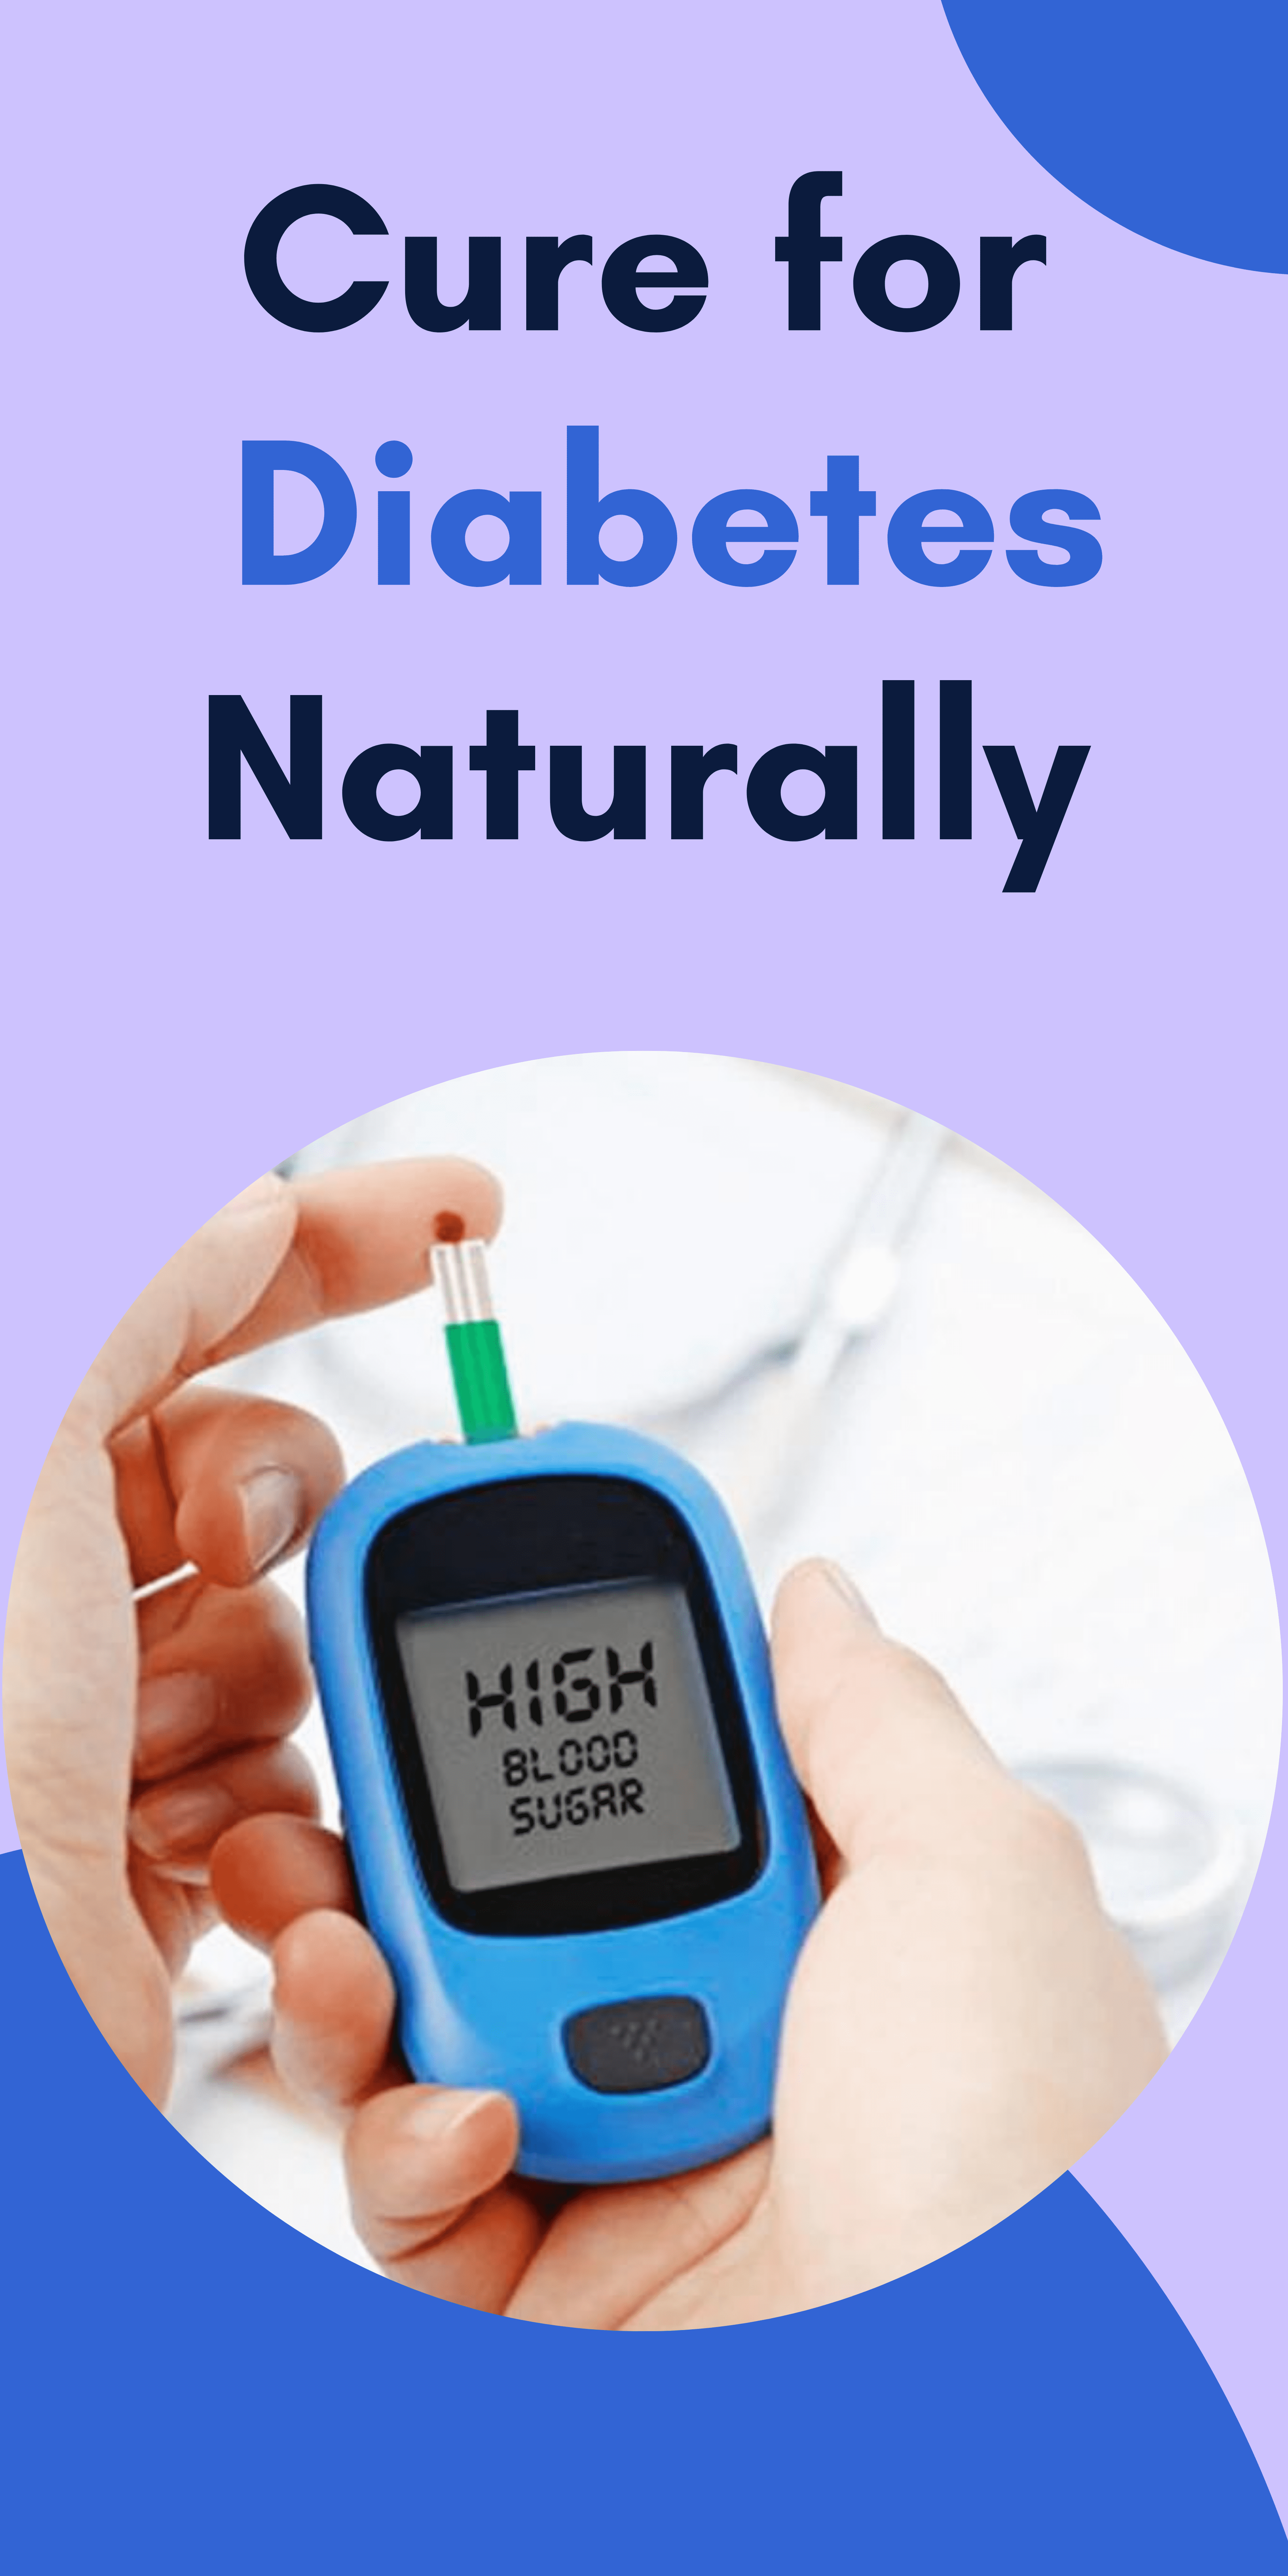 Cure for diabetes naturally